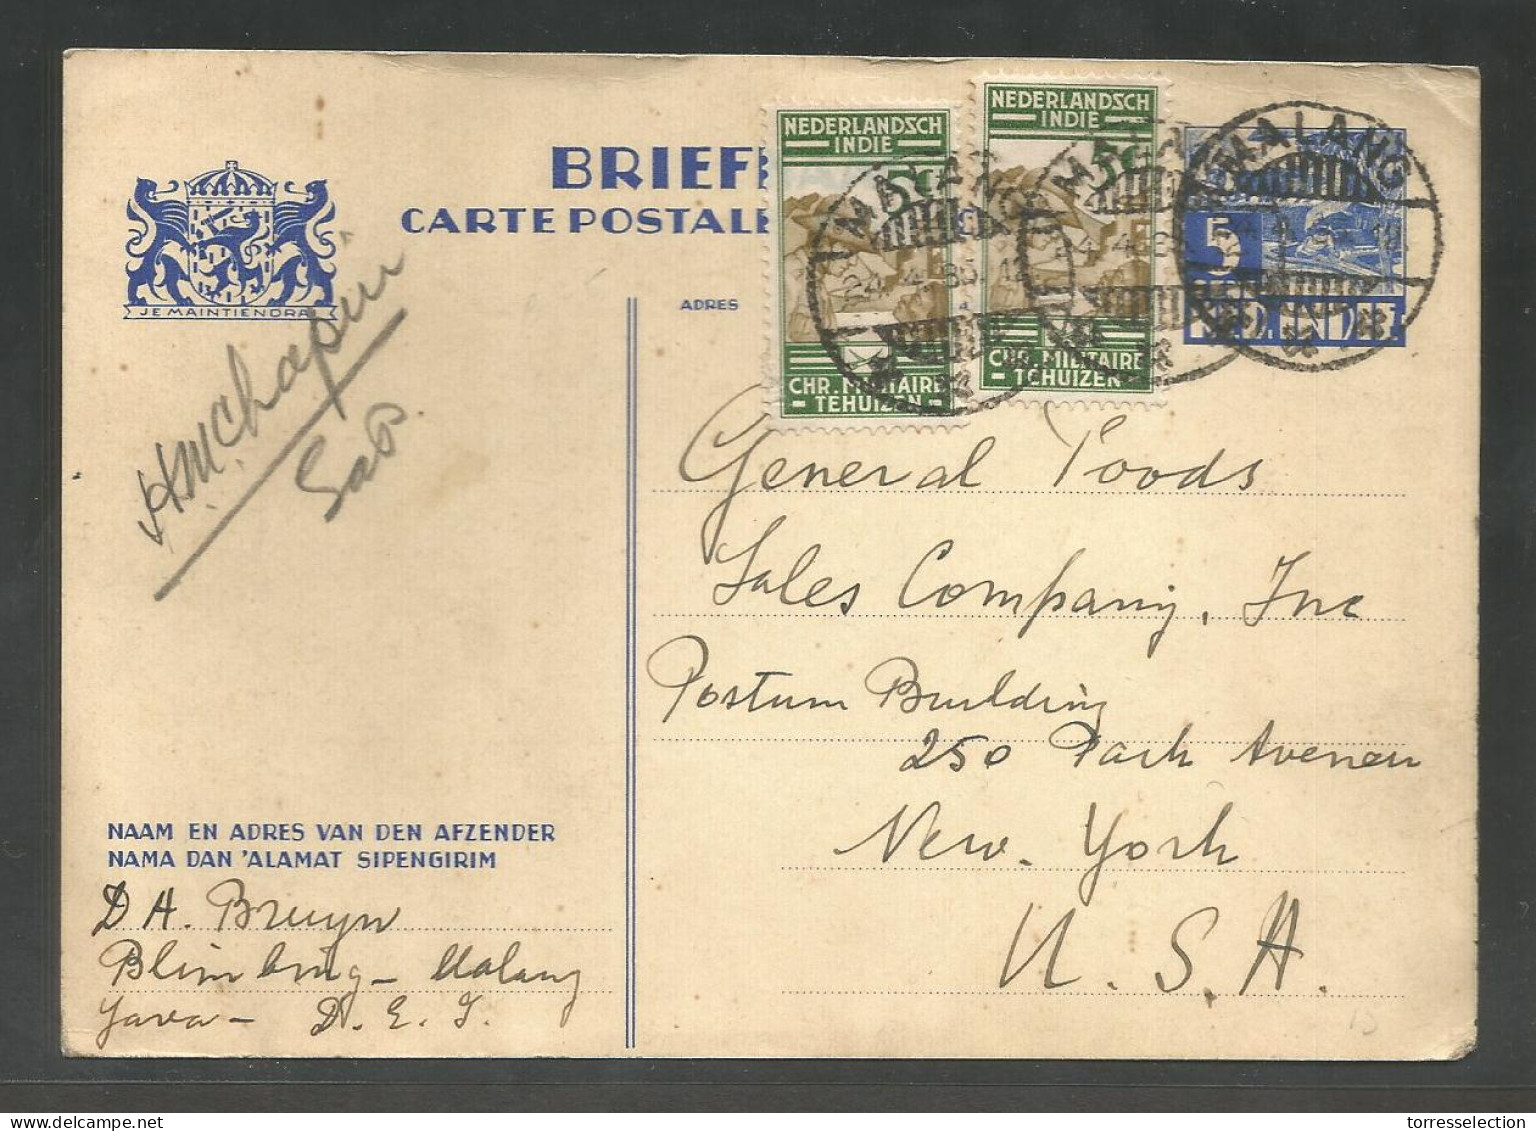 DUTCH INDIES. 1935 (21-24 April). Malang - USA, NYC (23 May). 5c Blue Stat Card 2 Adtls. VF Used. - Indonesië